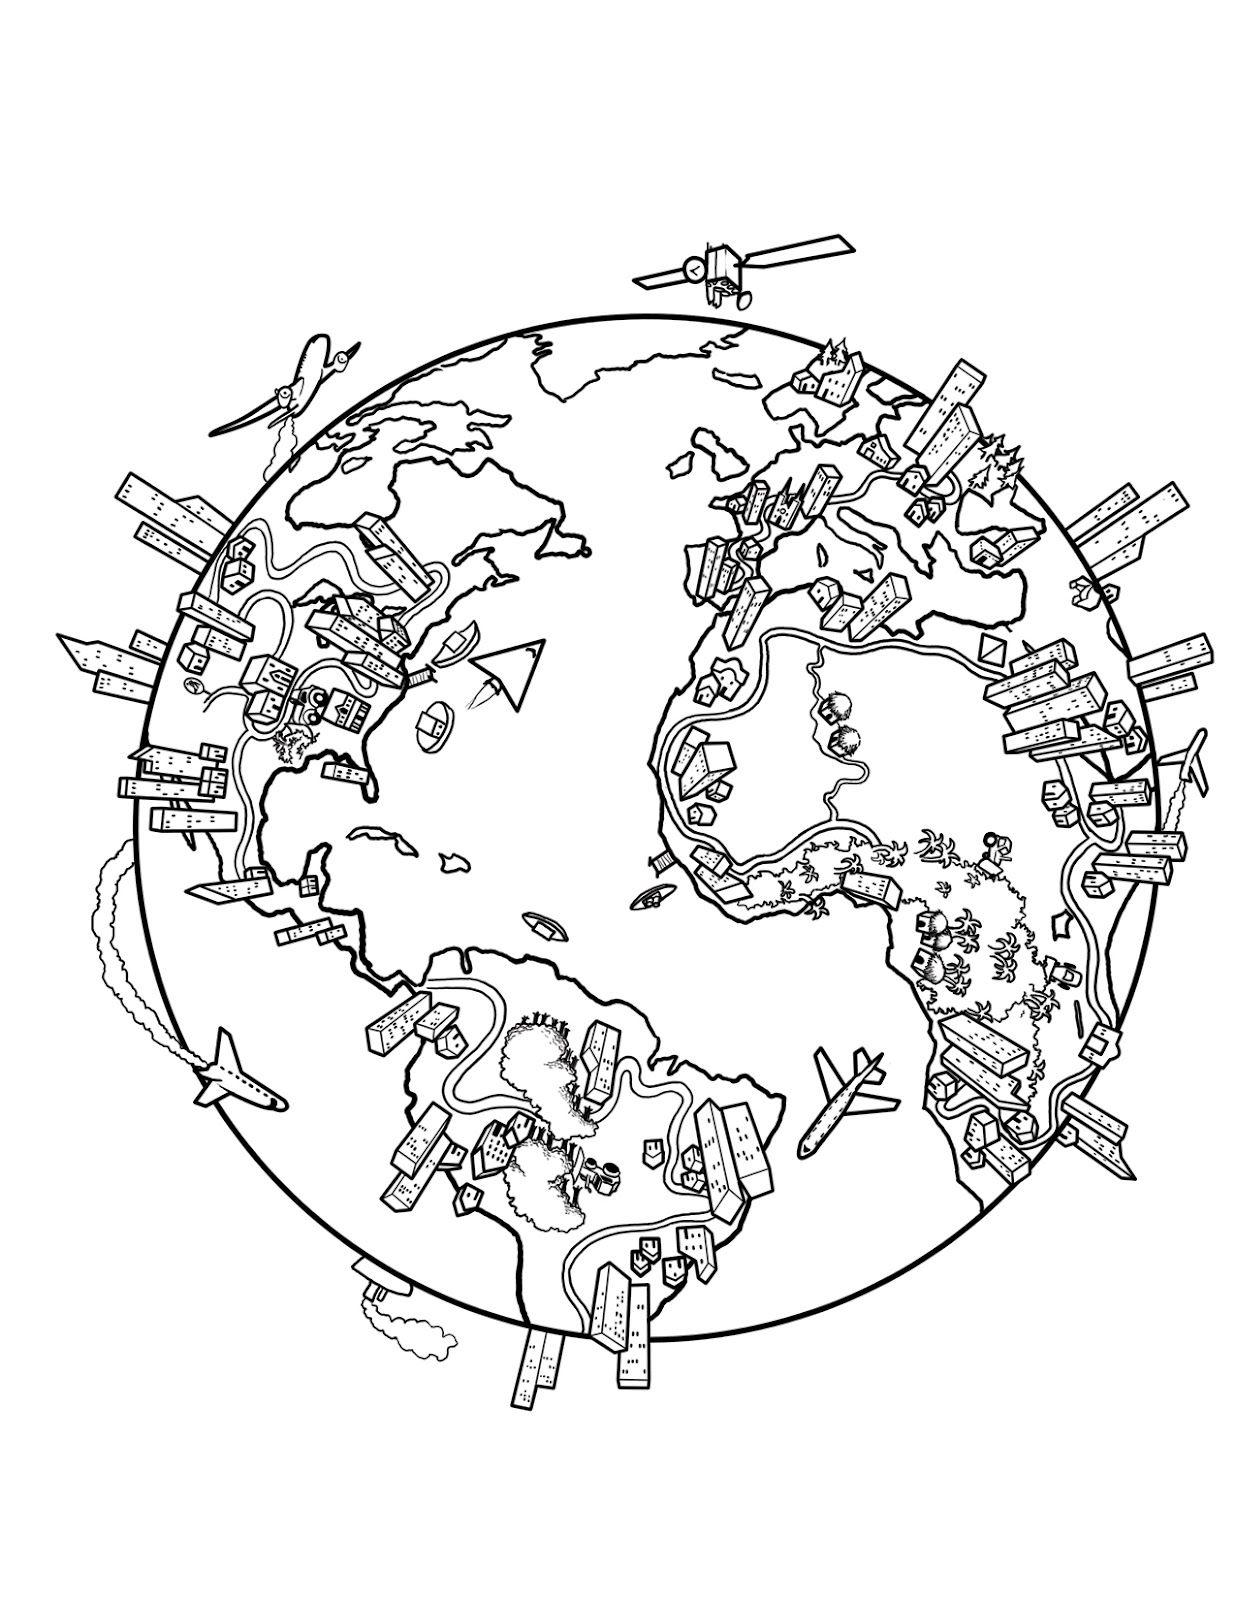 The World. Coloring page. | World map coloring page, World map printable,  Flag coloring pages